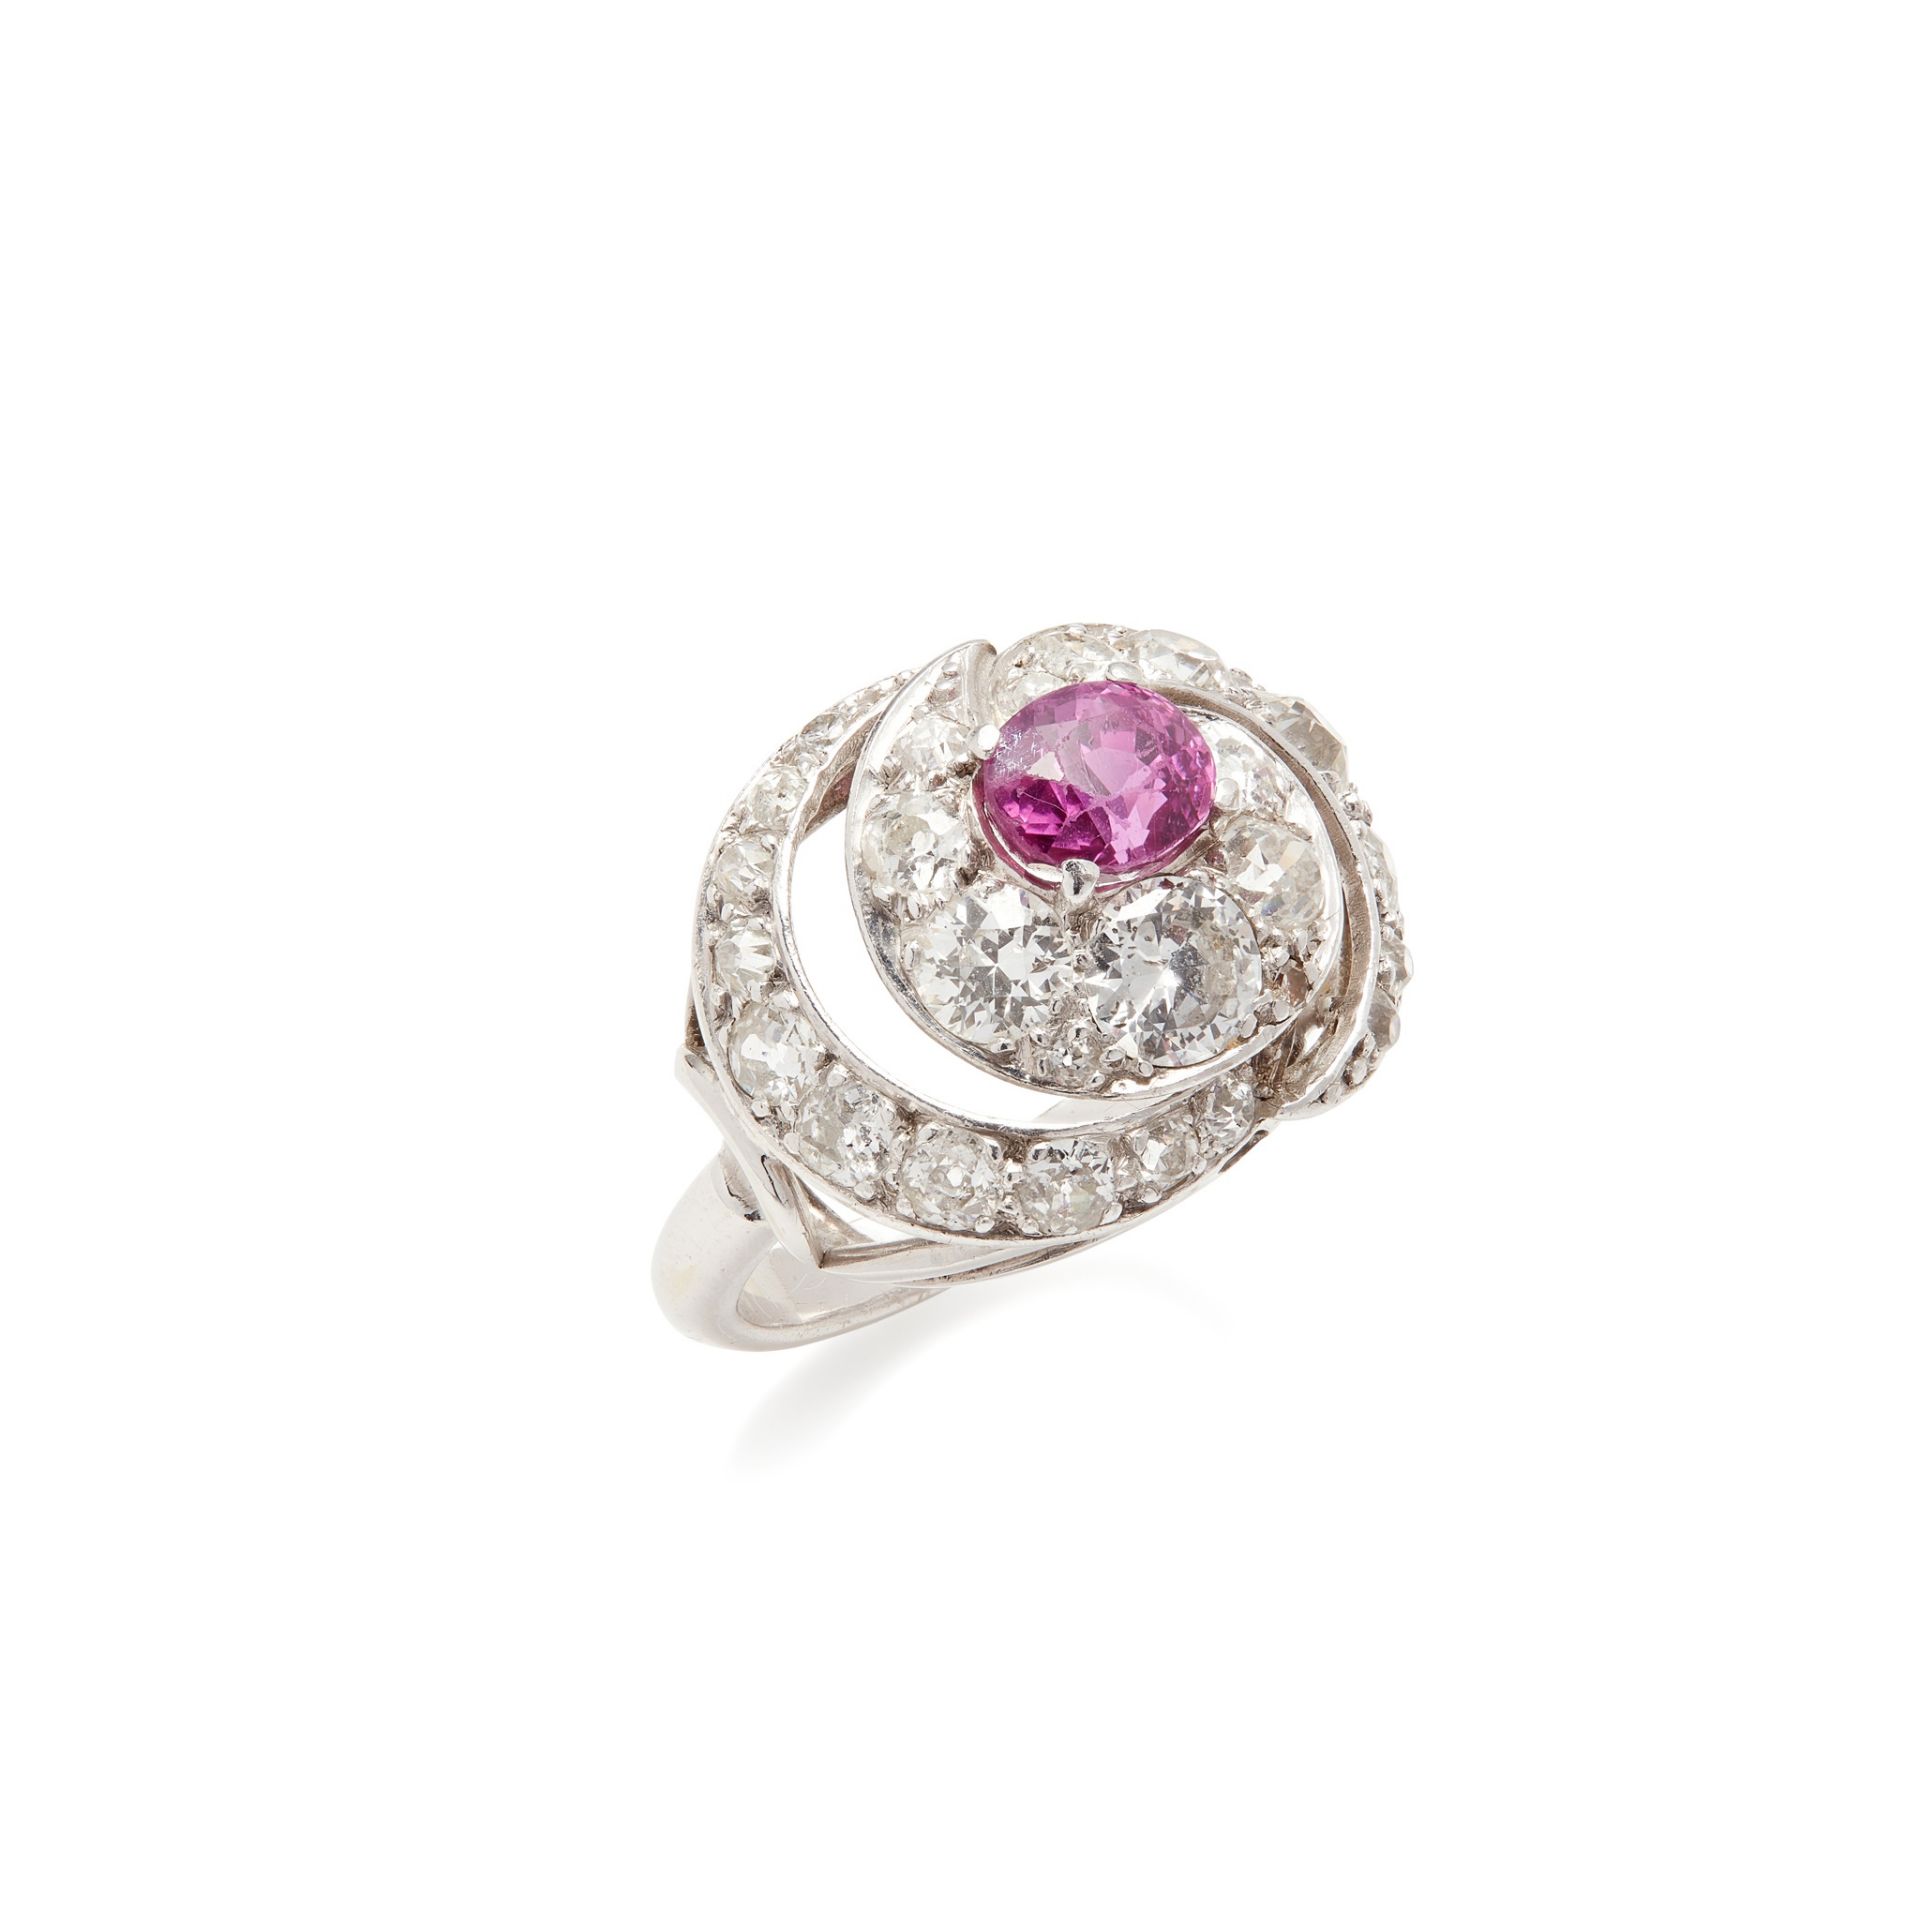 A pink sapphire and diamond set ring